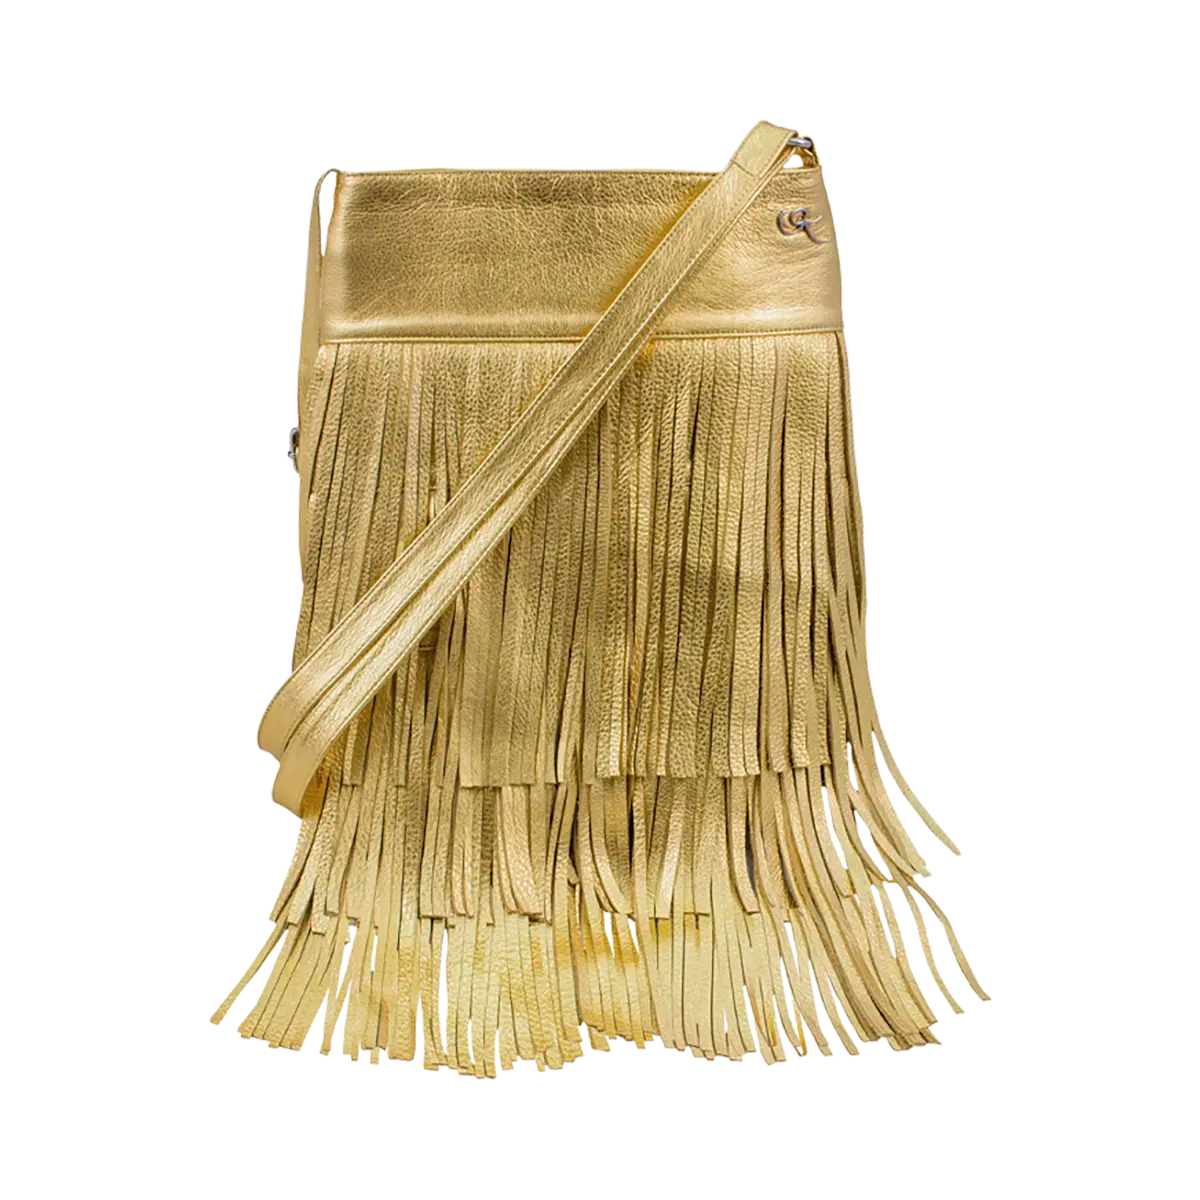 gold leather shoulder bag with 3 layers of fringe. Fashion accessories, for women in San Diego, CA.